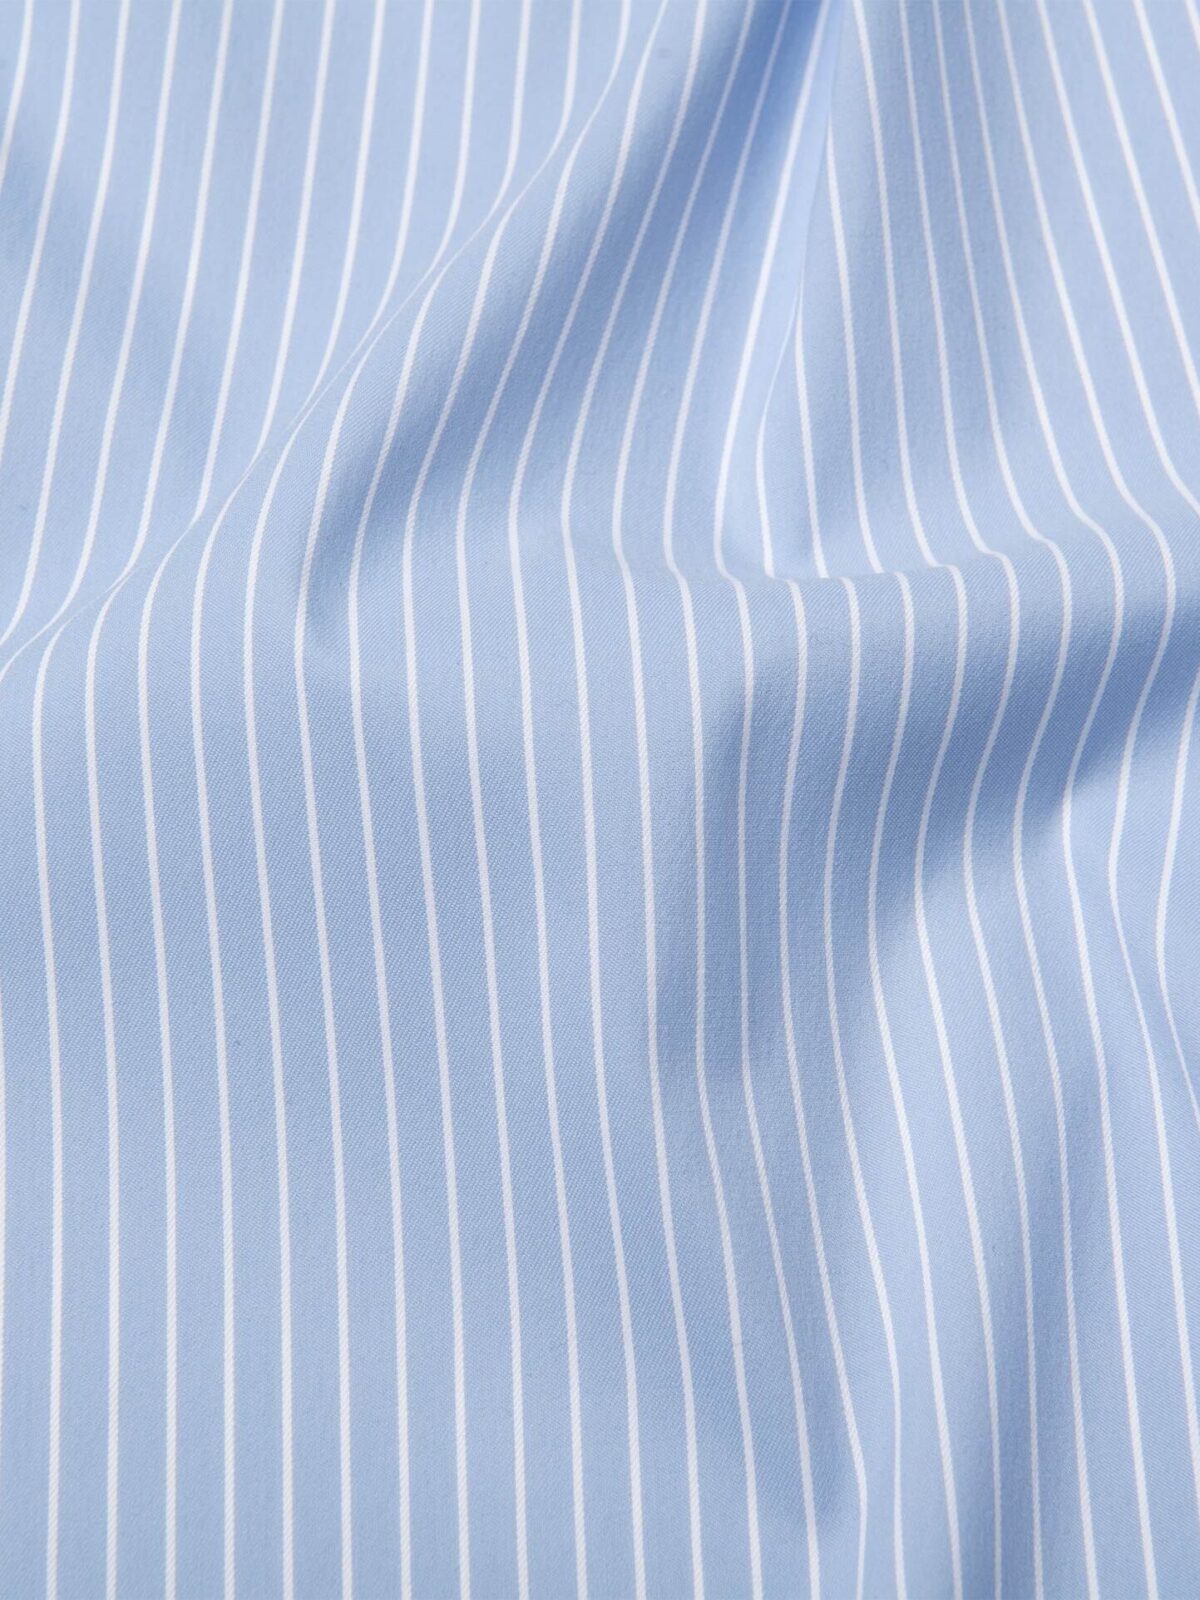 Foreshore - Washable Striped Performance Fabric